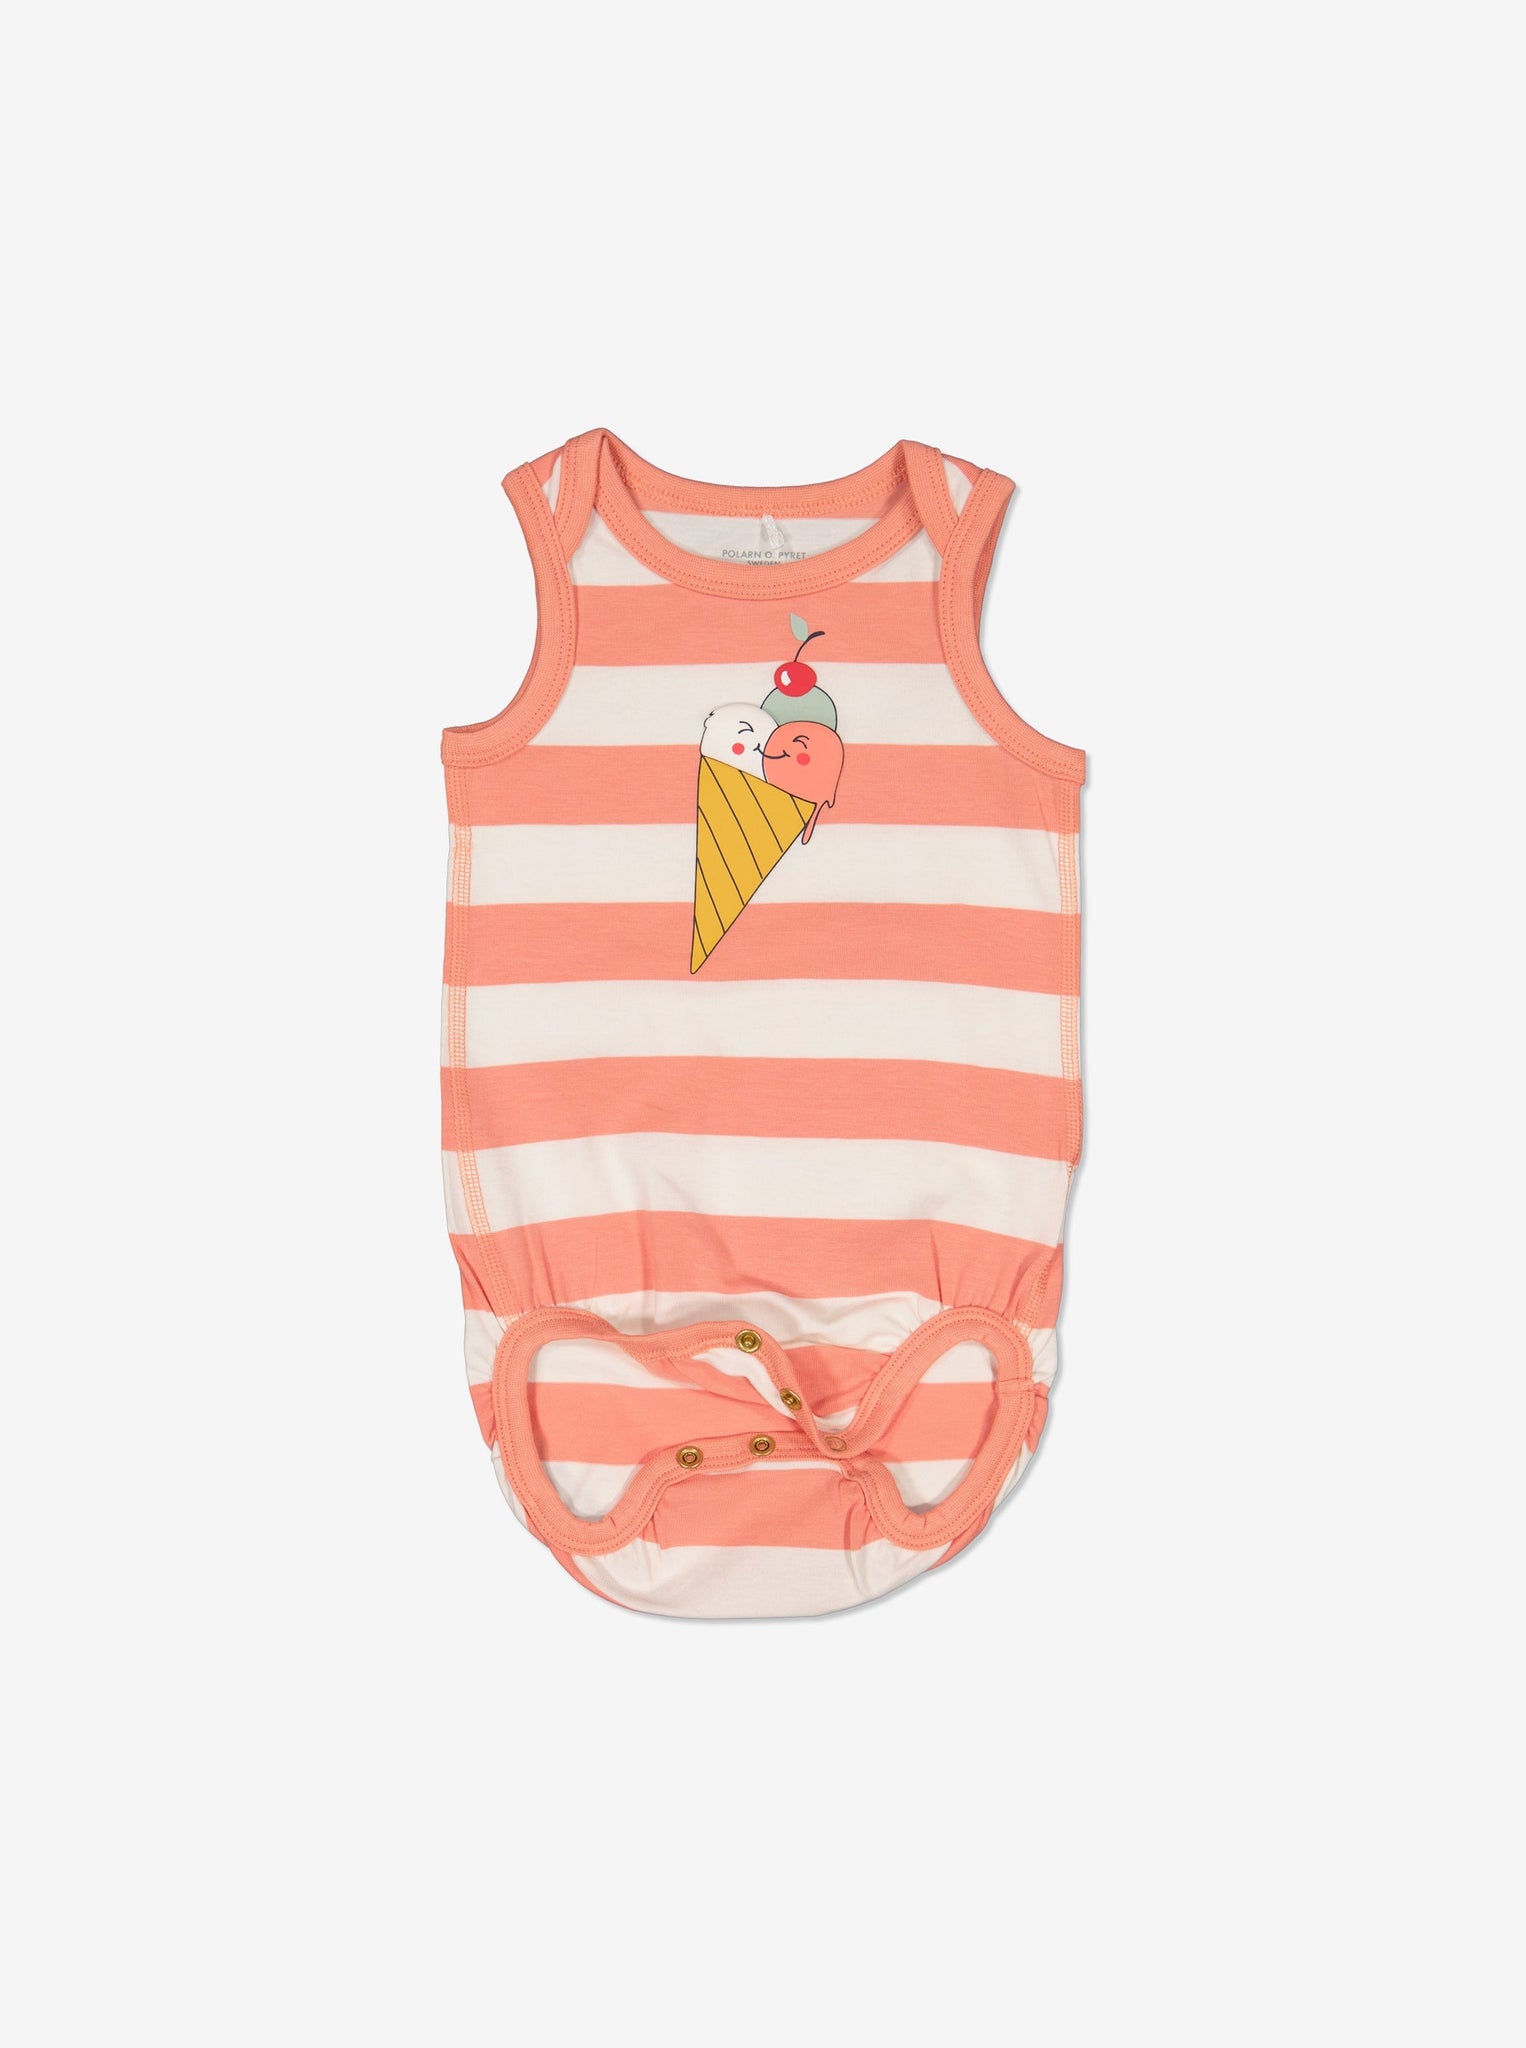 Peach Sleeveless Newborn Babygrow from Polarn O. Pyret Kidswear. Made from ethically sourced materials.